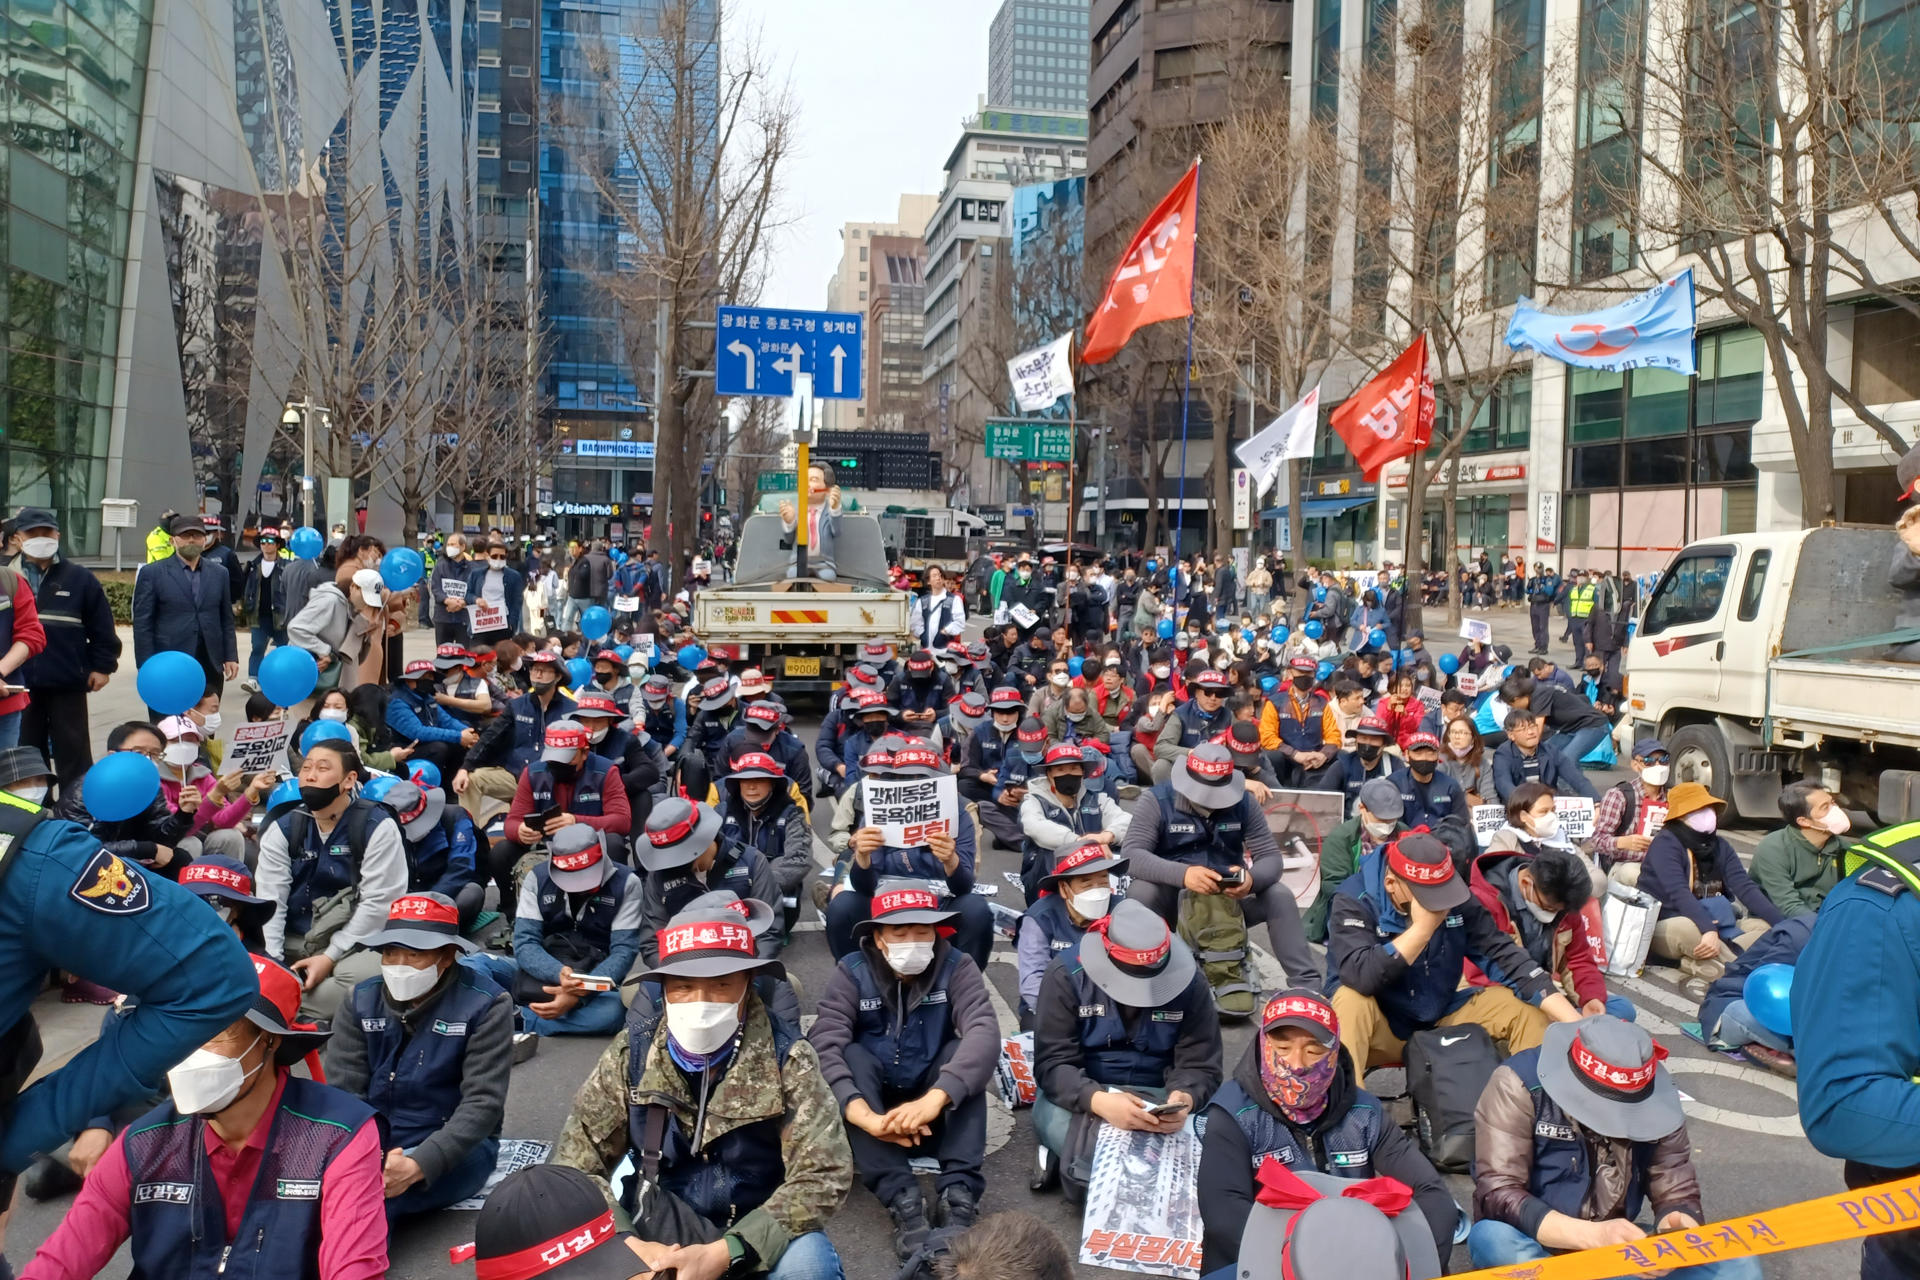 Thousands of South Koreans demonstrate in Seoul against President Yoon Suk-yeol and against the Japanese government and companies after presenting this week a controversial plan to compensate fifteen people who were enslaved by these companies during World War II. EFE/ Andrés Sánchez Braun